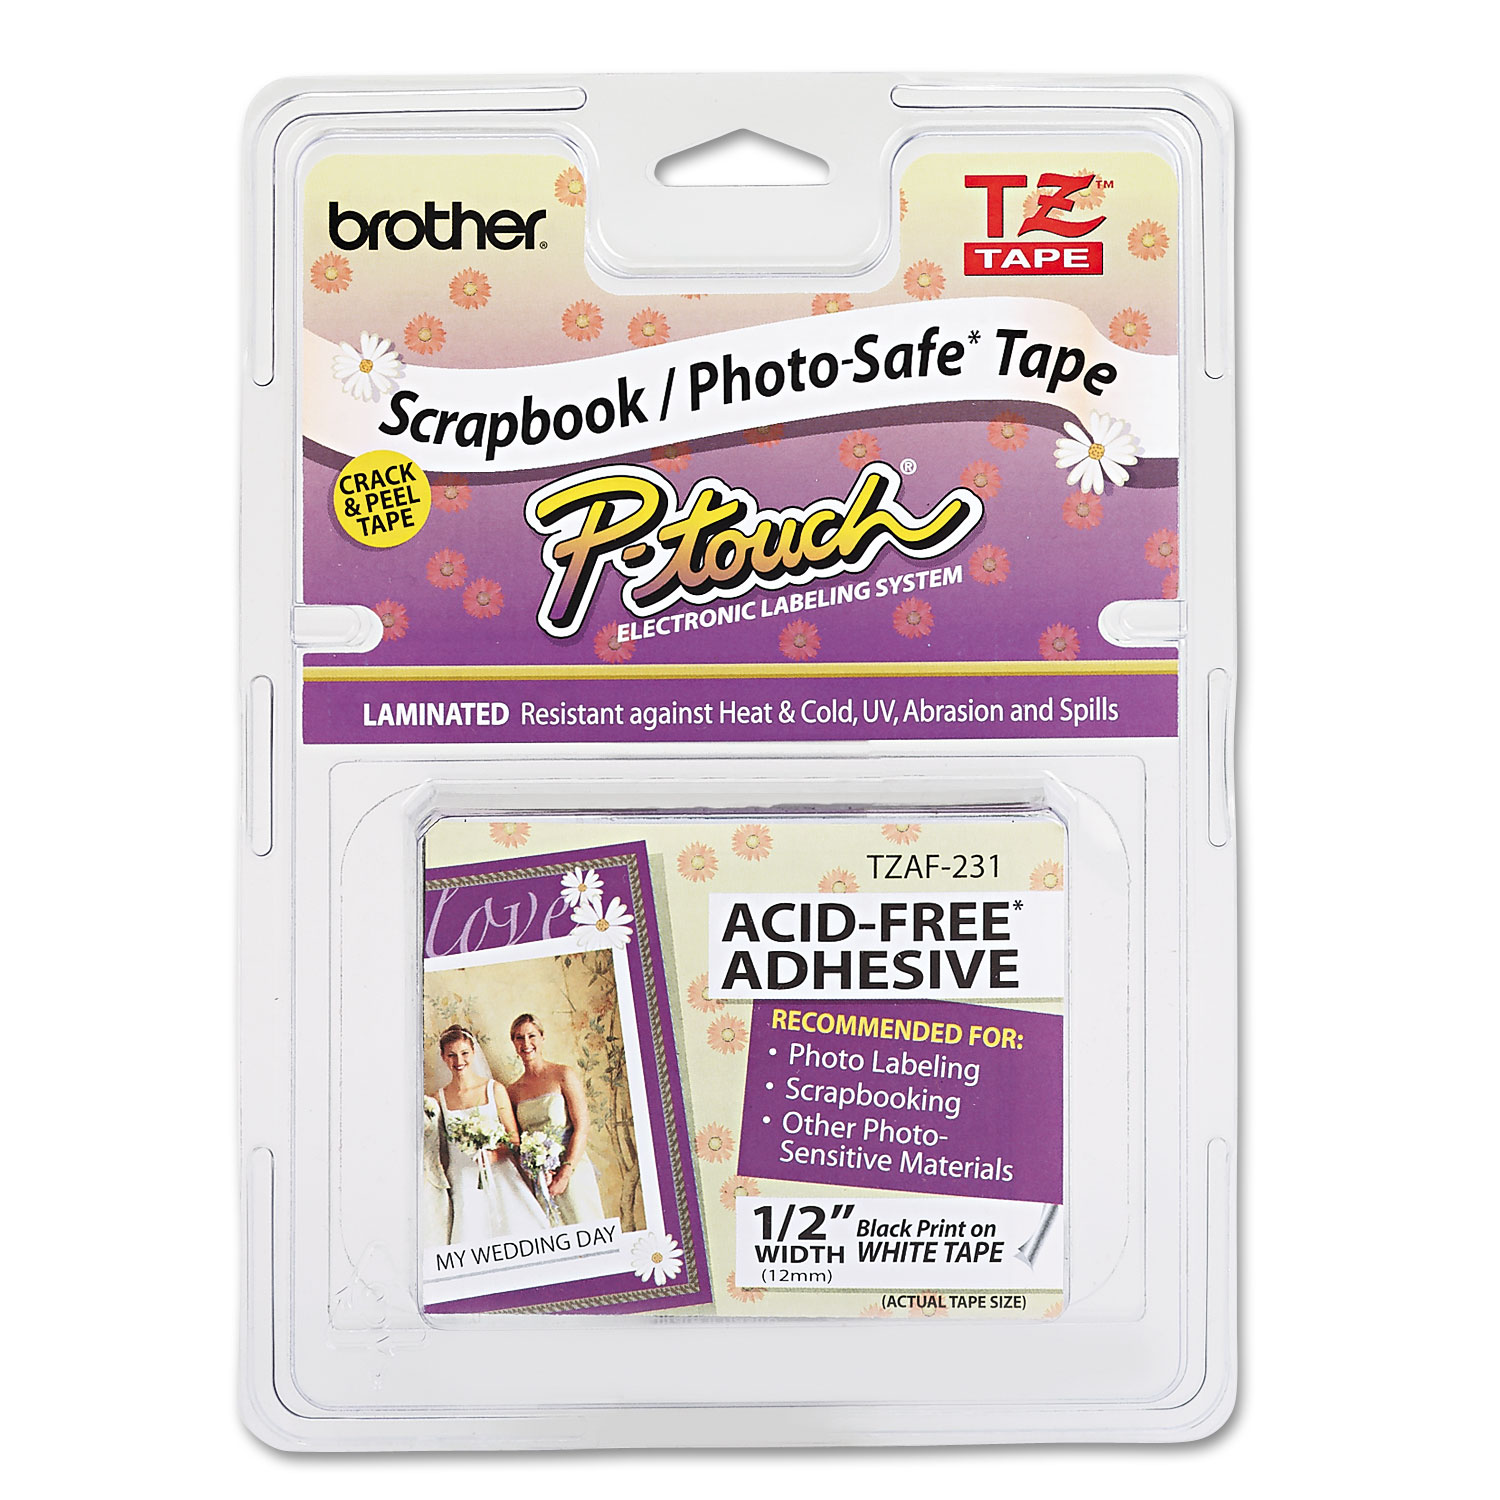  Brother P-Touch TZEAF231 TZ Photo-Safe Tape Cartridge for P-Touch Labelers, 0.47 x 26.2 ft, Black on White (BRTTZEAF231) 